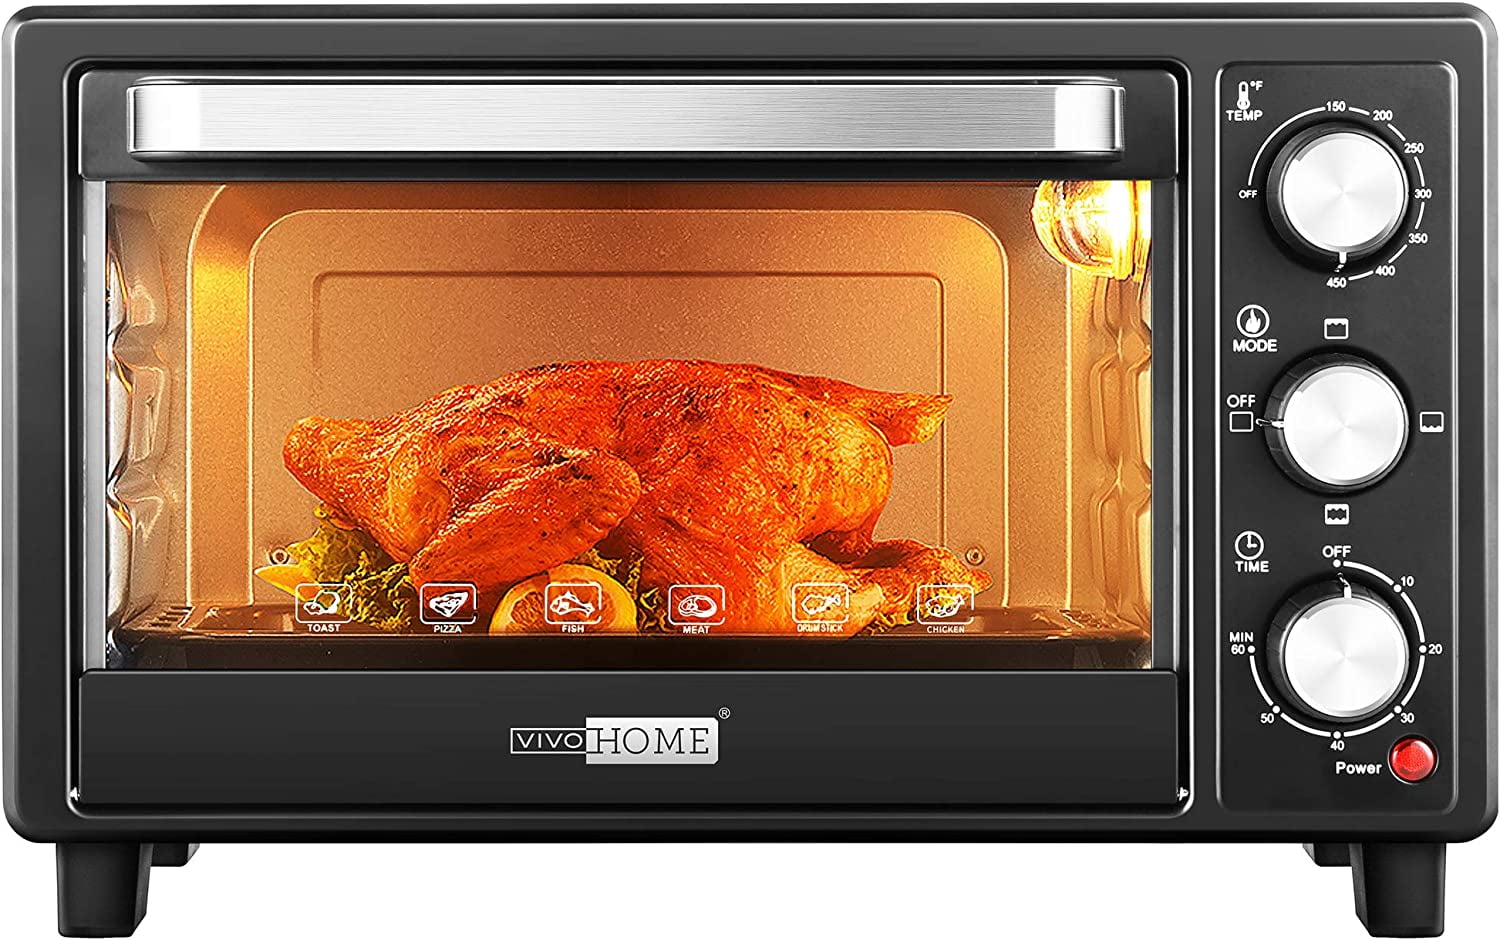 Black Convection Oven 6-Slice Or 9-Inch Pizza